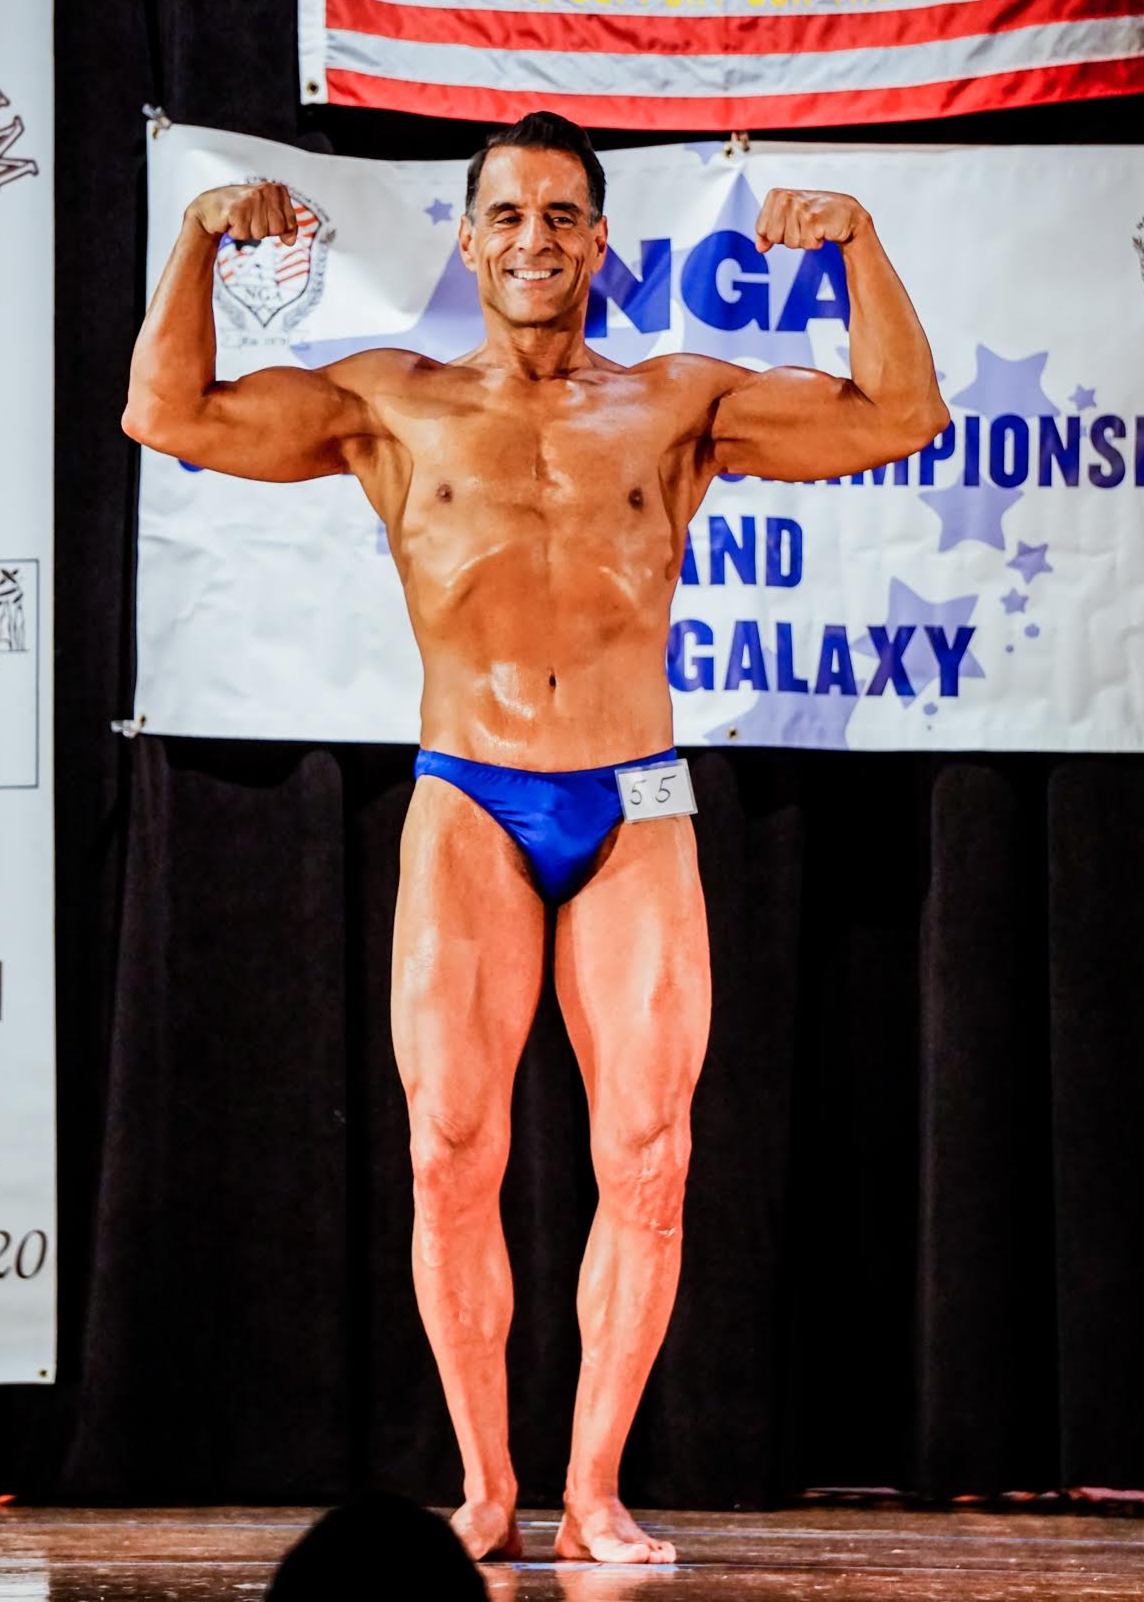 Greg poses as part of a bodybuilding competition.